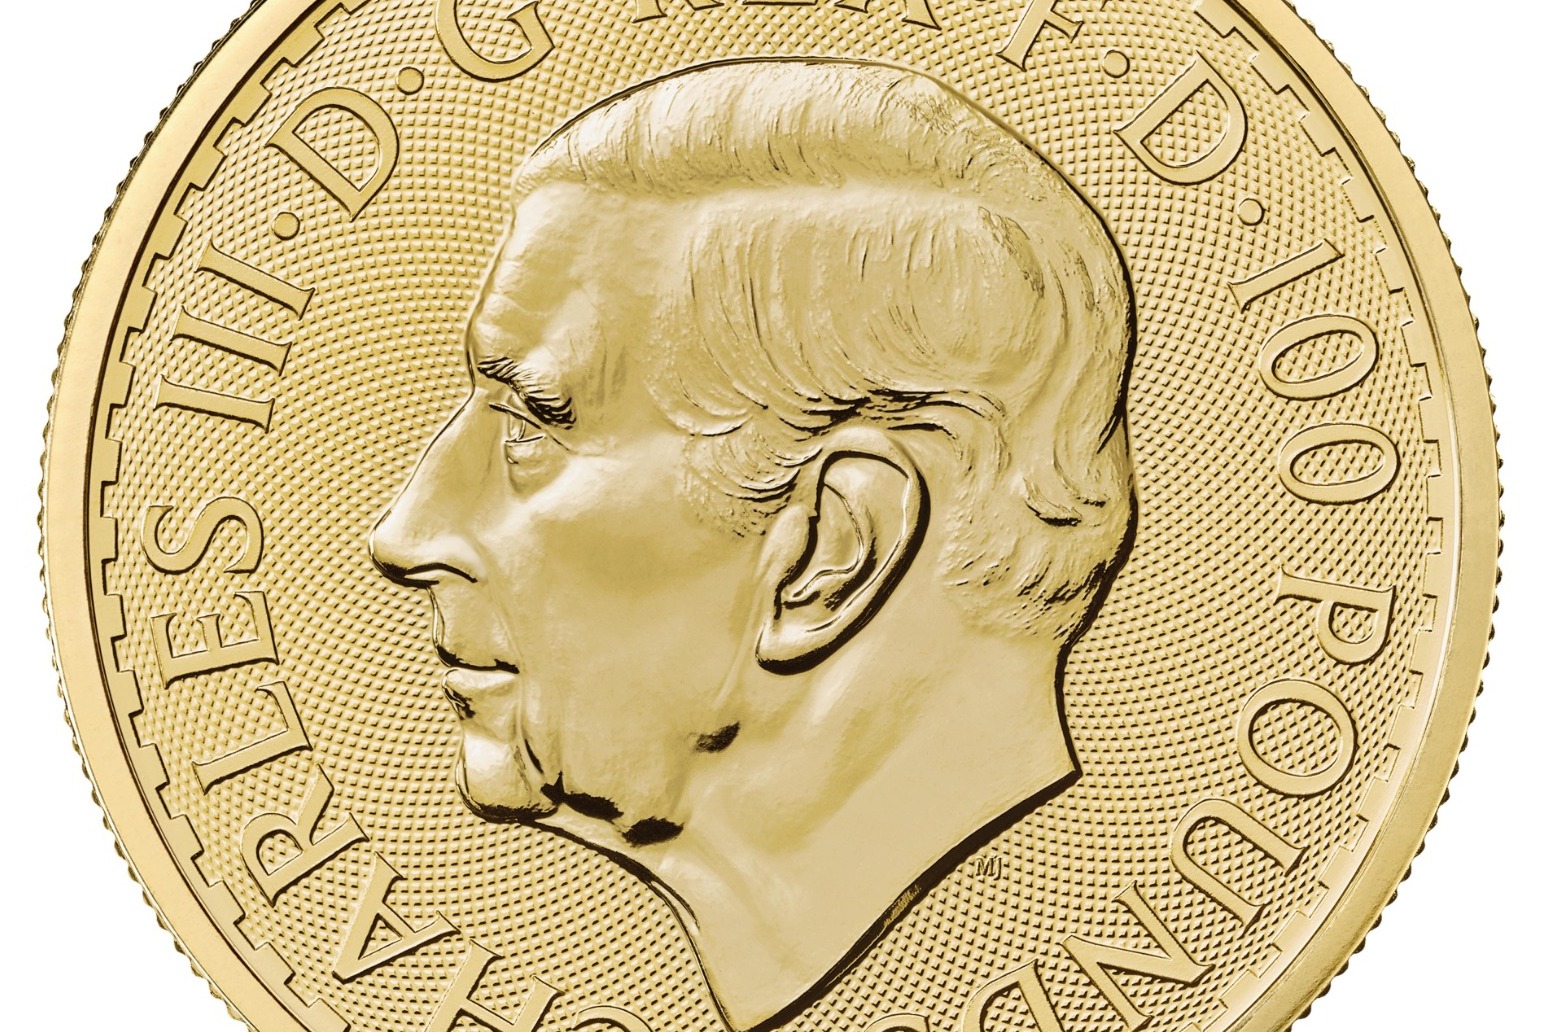 Bullion coin bearing King Charles’s portrait is unveiled by the Royal Mint 